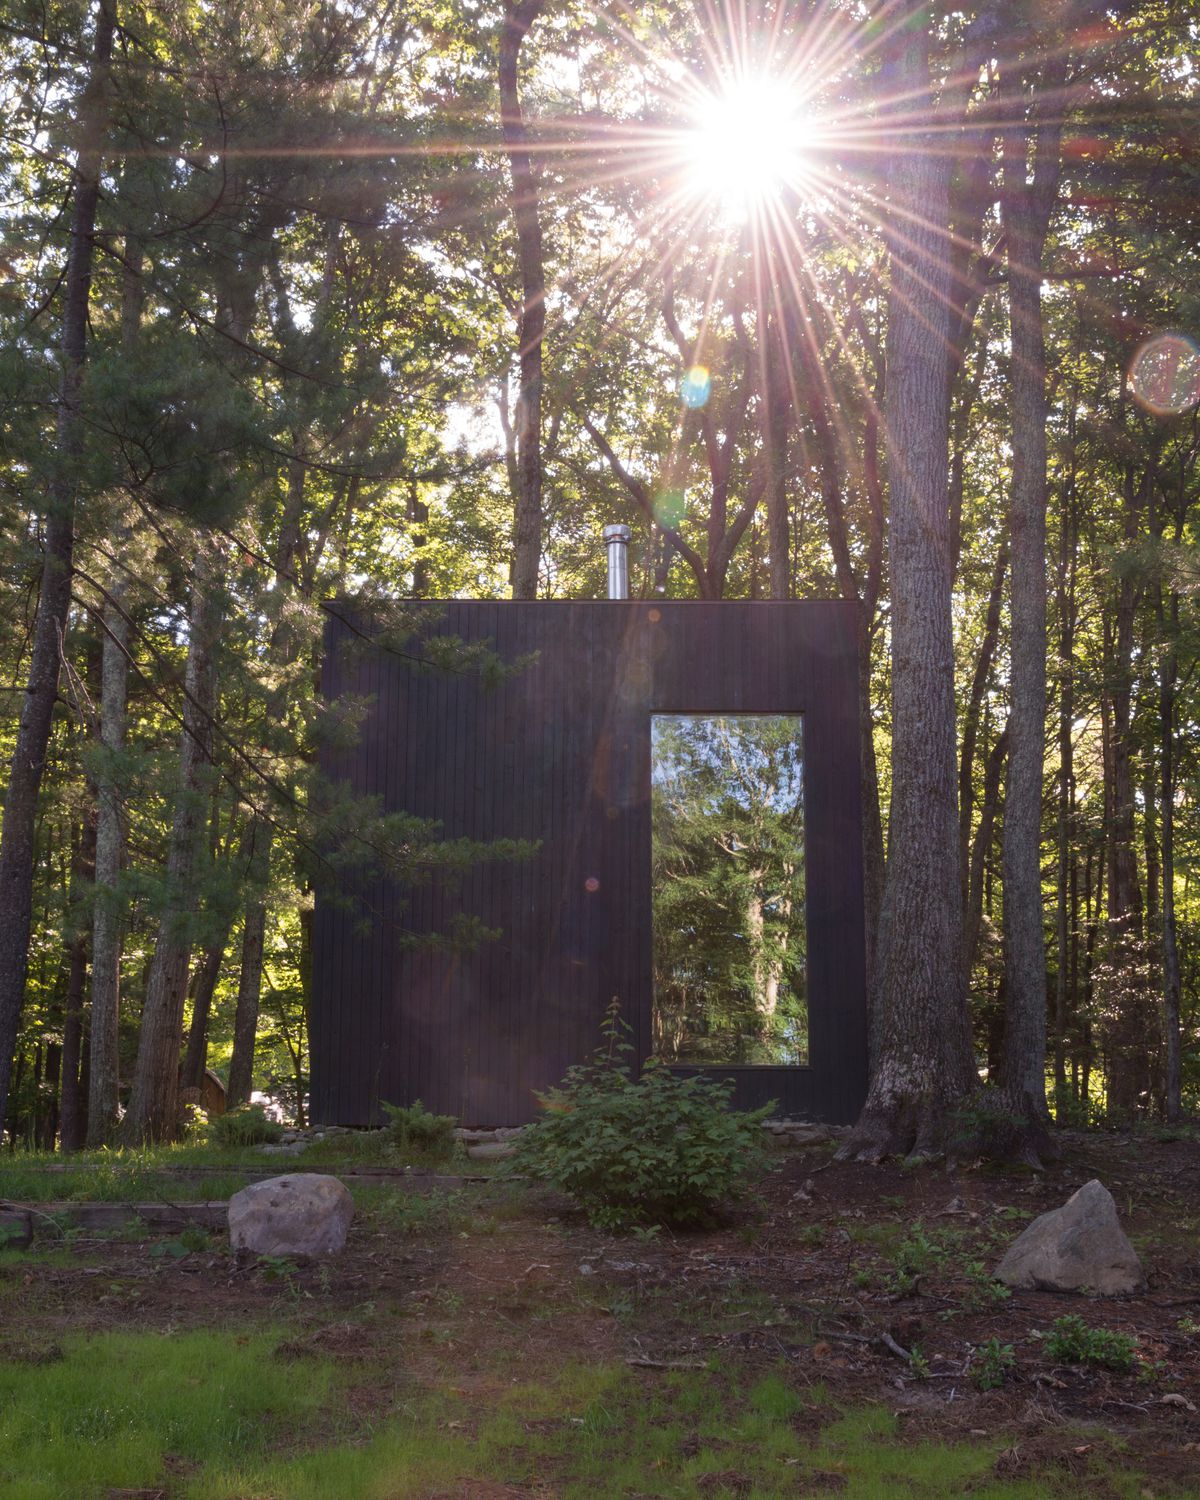 The cabin's big window mirrors the trees around it.